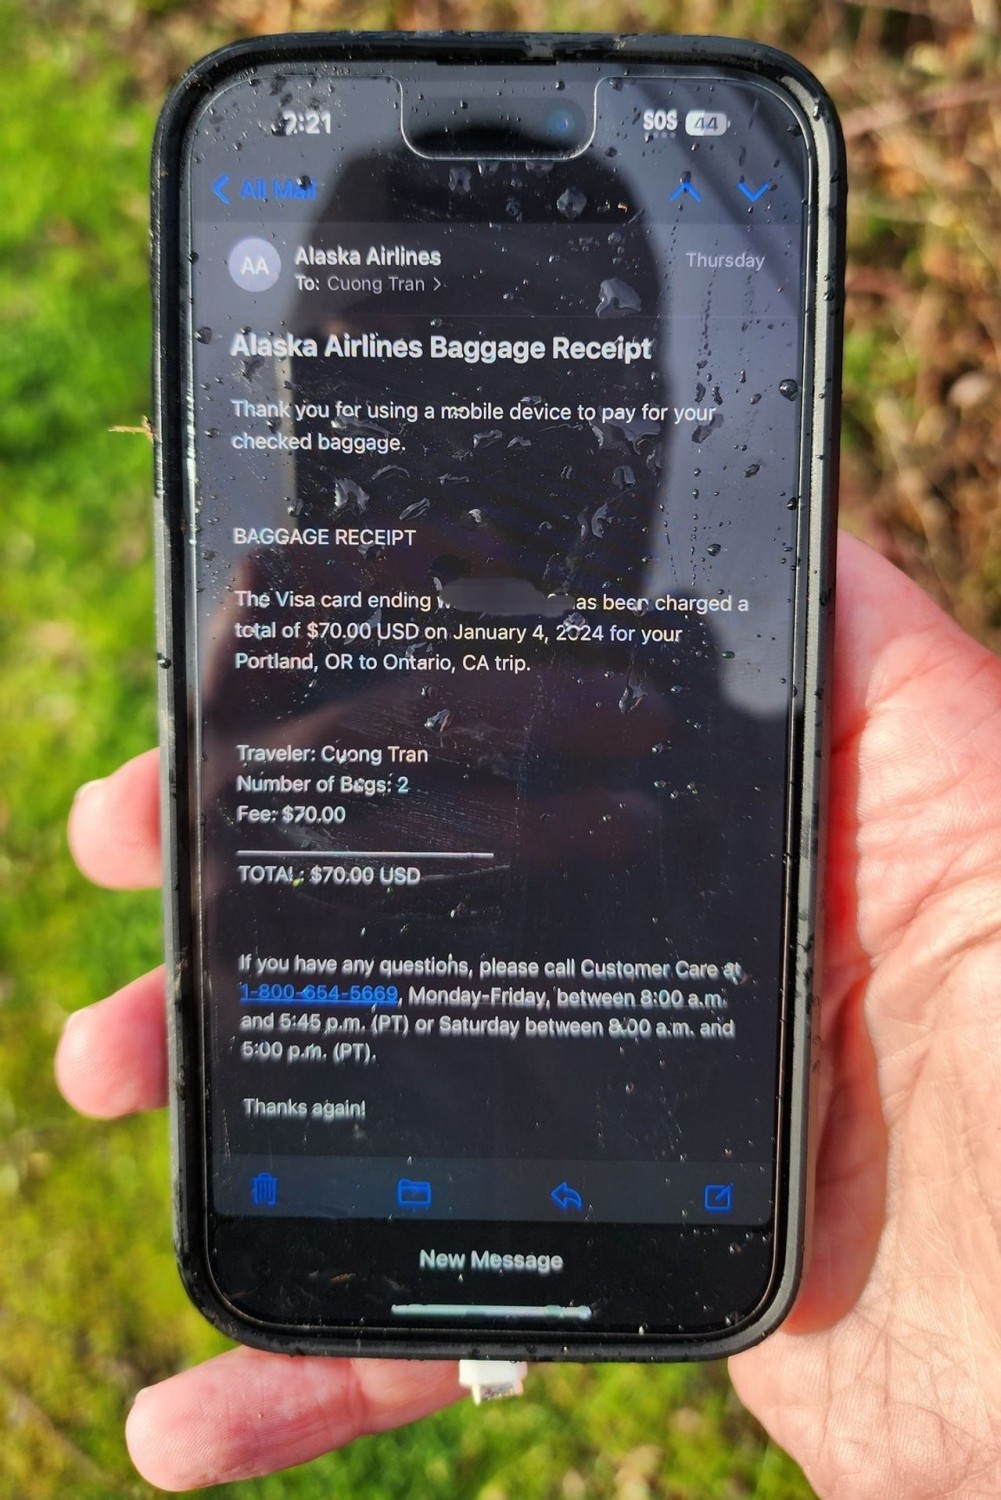 This iPhone 14 Pro Max flew out the door plug of an Alaska Airlines flight and landed on the side of a road in Portland, Ore. The person who found the phone obscured the owner’s personal information on the screen to protect his privacy.